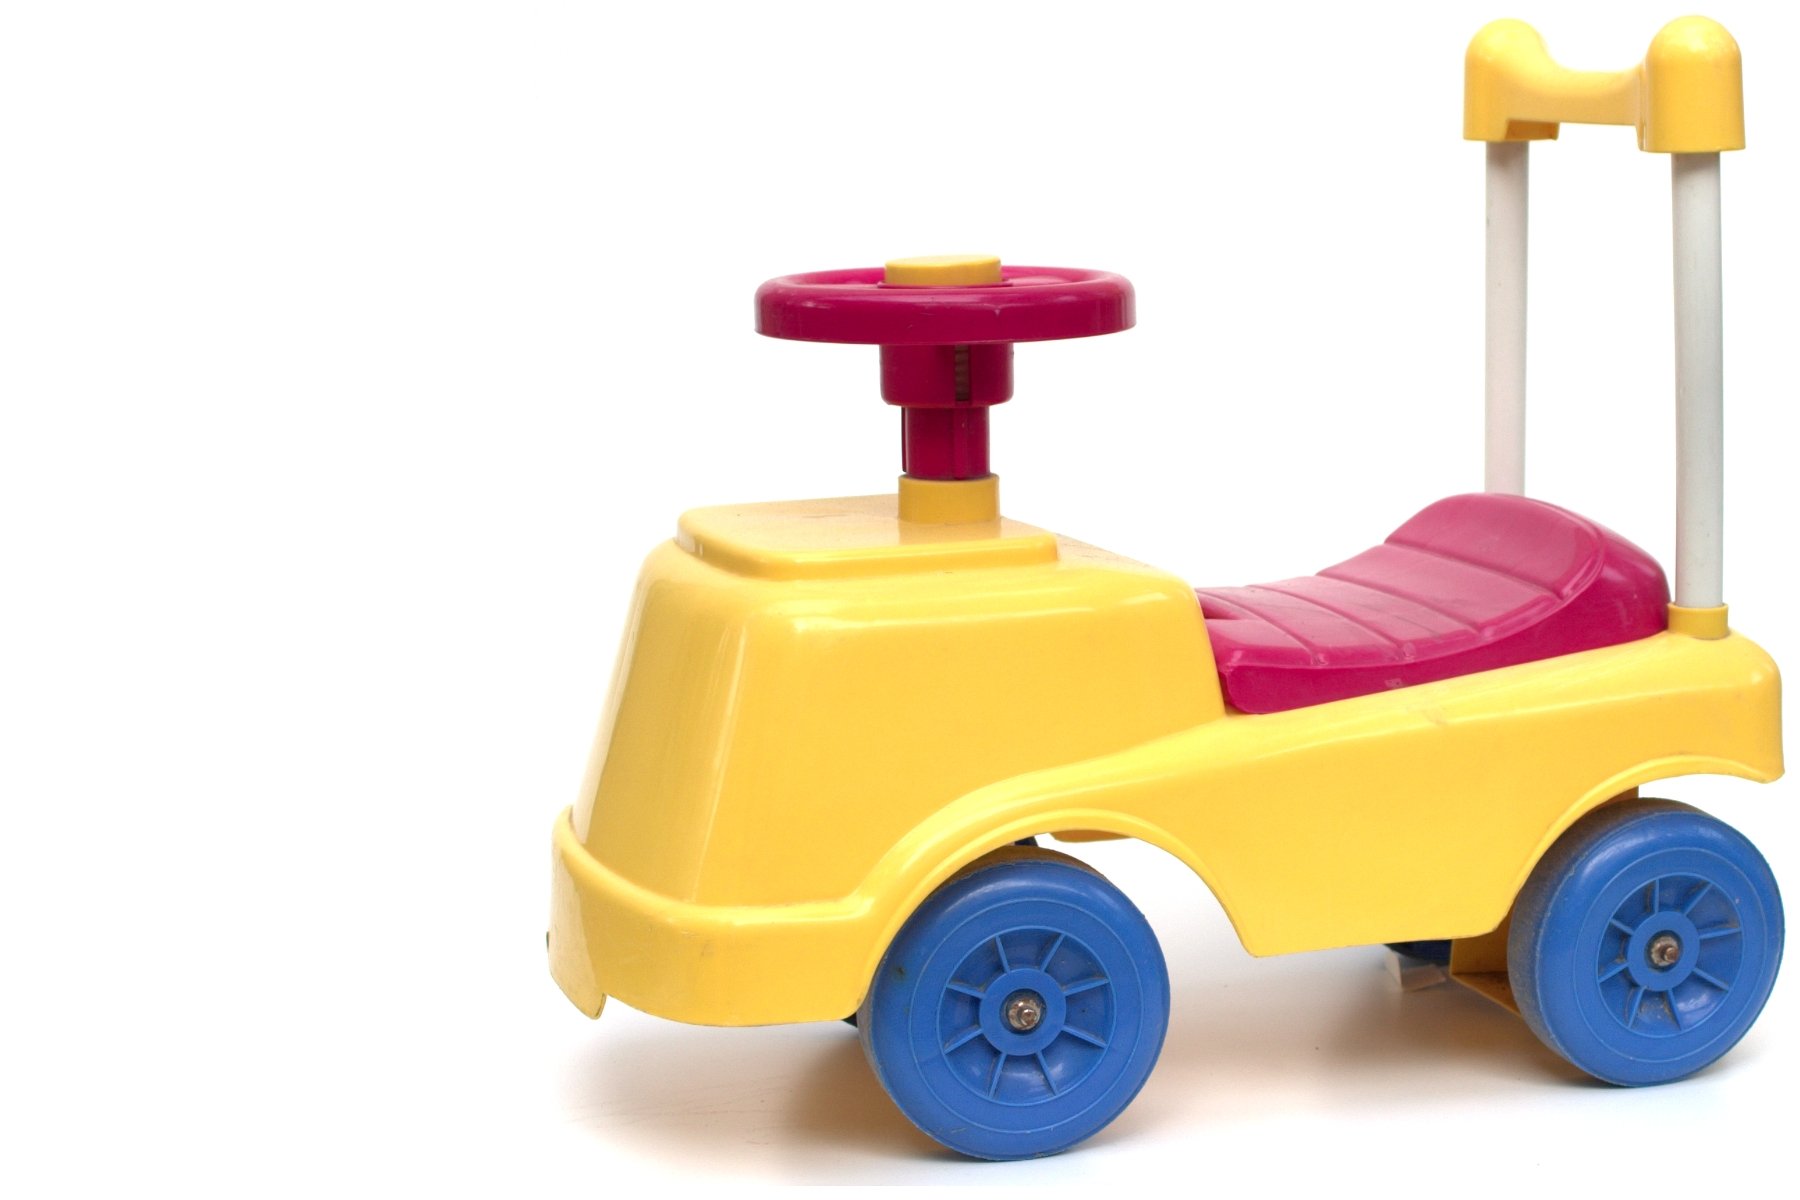 Little ride on car toy, Blue, Playing, Yellow, White, HQ Photo